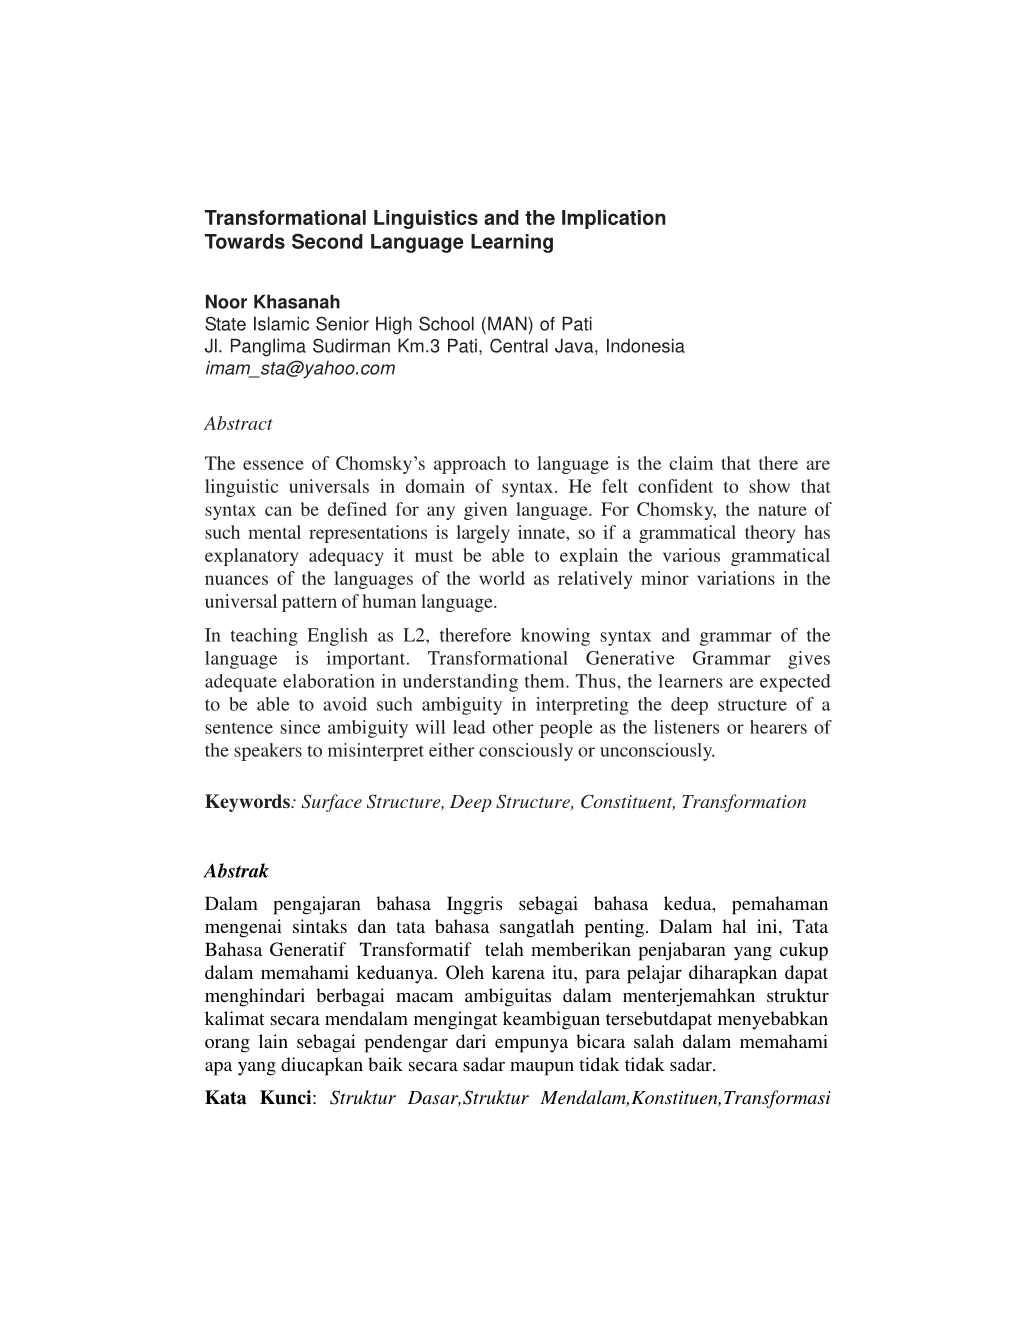 Transformational Linguistics and the Implication Towards Second Language Learning